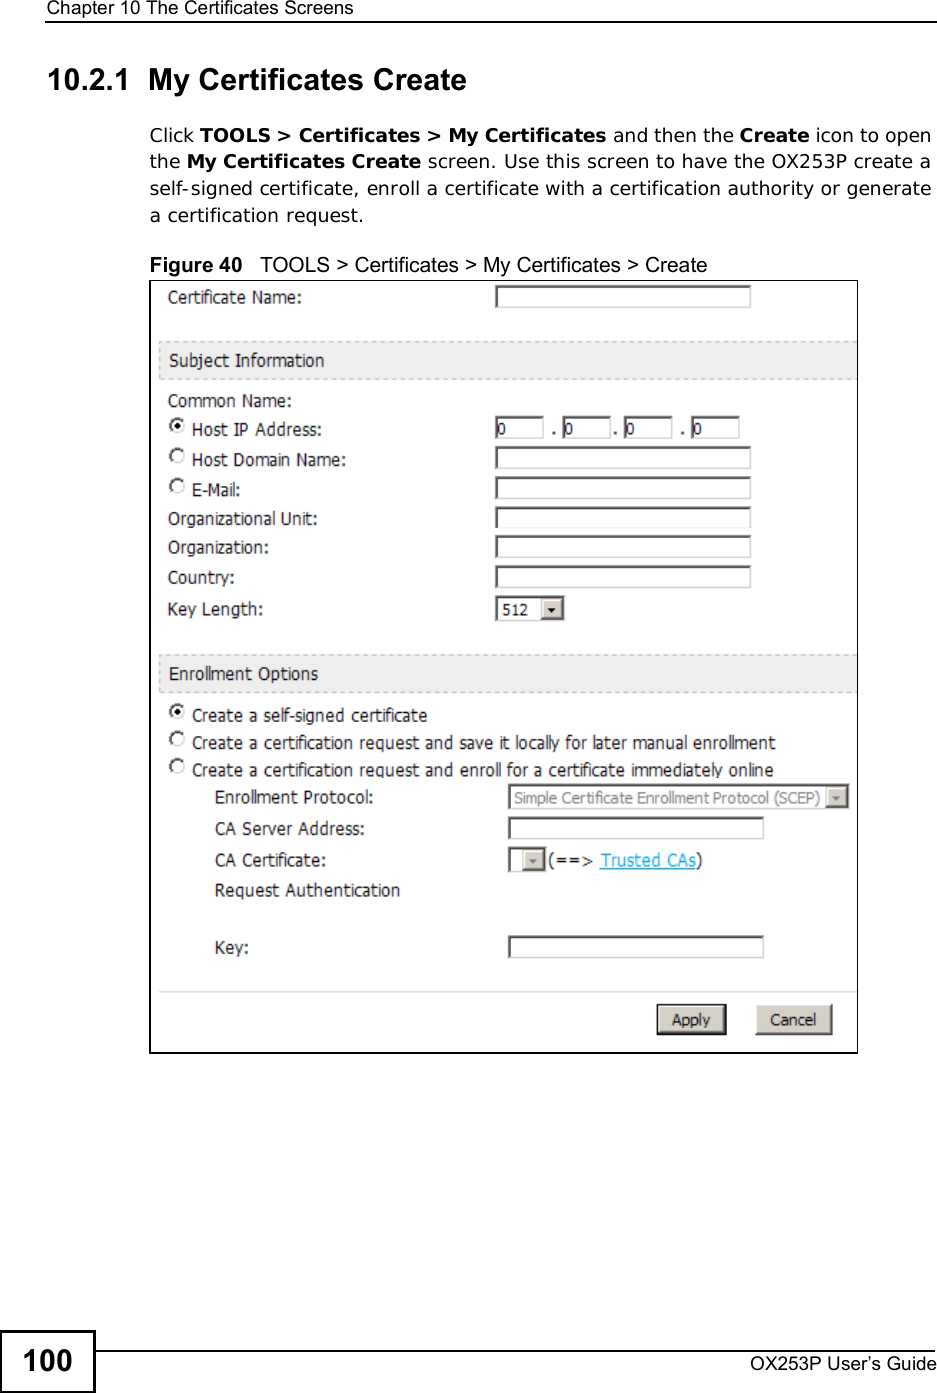 Chapter 10The Certificates ScreensOX253P User’s Guide10010.2.1  My Certificates Create Click TOOLS &gt; Certificates &gt; My Certificates and then the Create icon to open the My Certificates Create screen. Use this screen to have the OX253P create a self-signed certificate, enroll a certificate with a certification authority or generate a certification request.Figure 40   TOOLS &gt; Certificates &gt; My Certificates &gt; Create